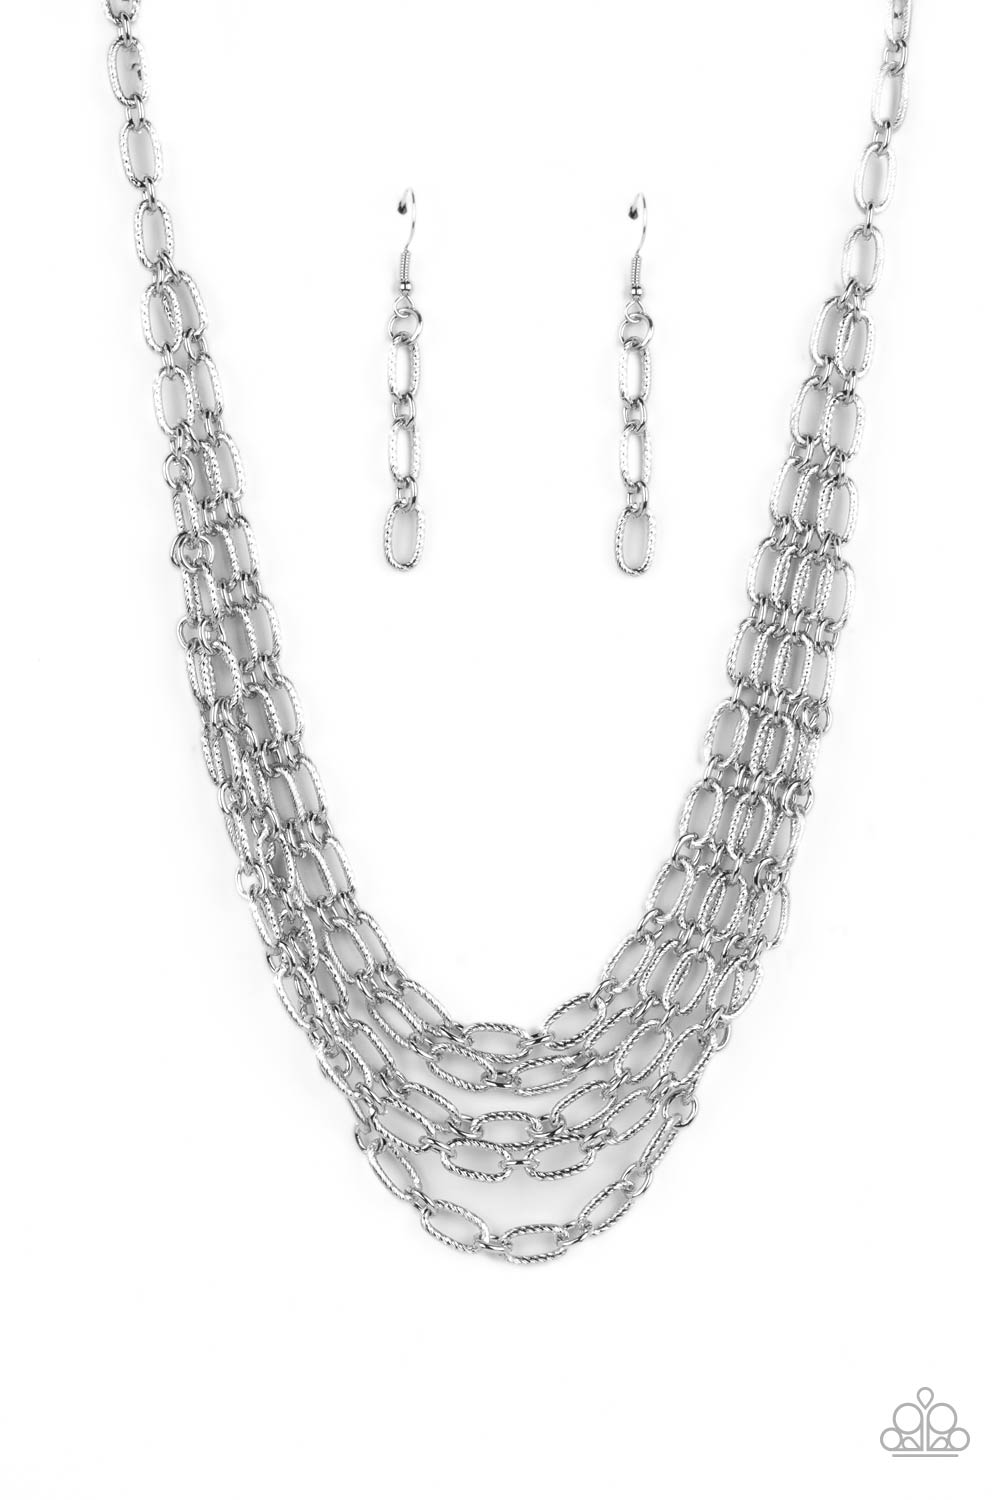 House of CHAIN - silver - Paparazzi necklace